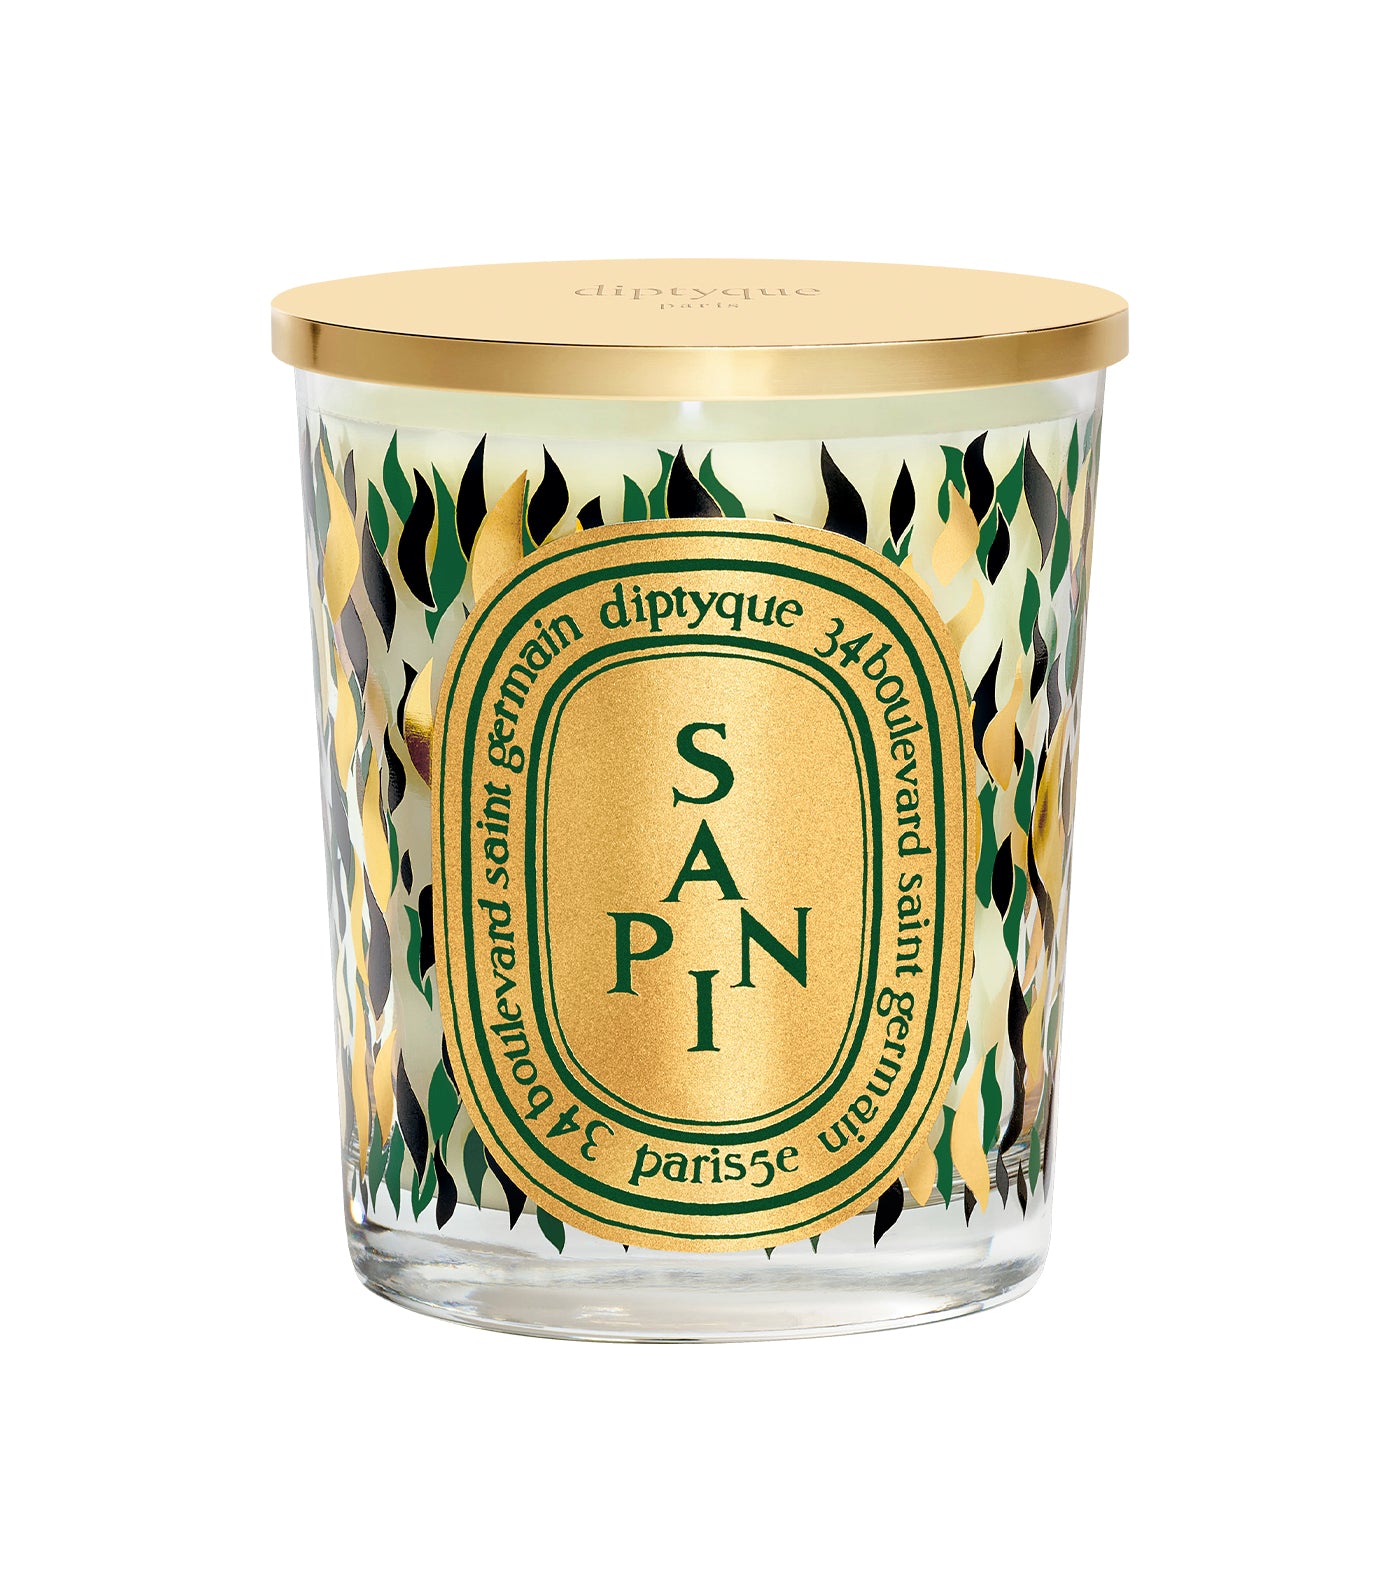 Pine Tree / Sapin Limited Edition Candle